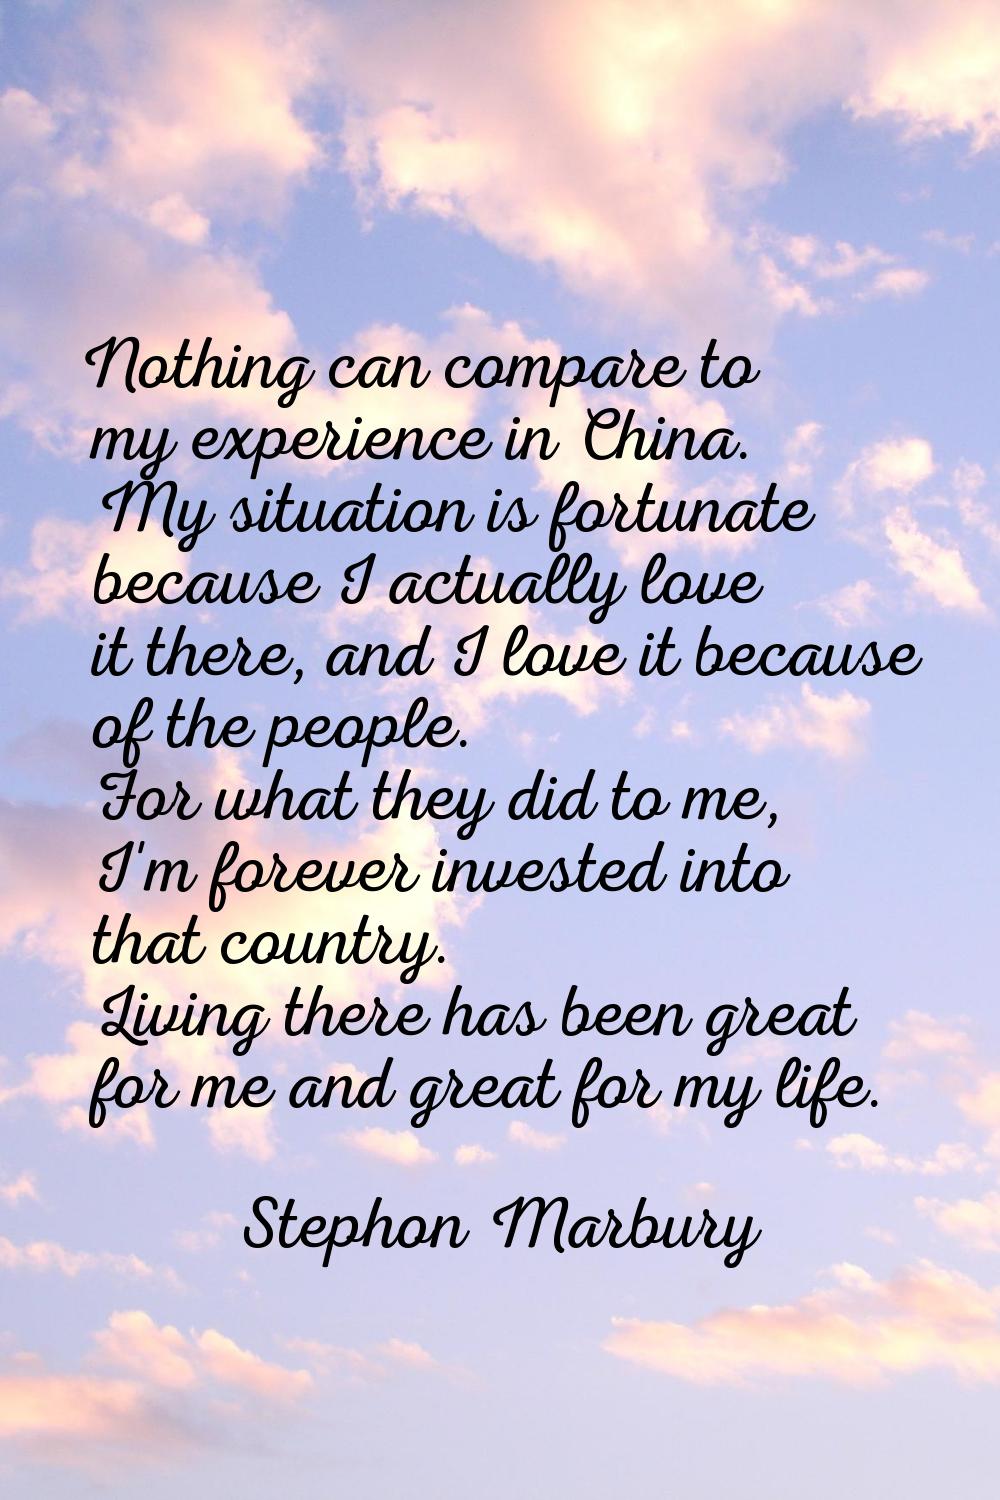 Nothing can compare to my experience in China. My situation is fortunate because I actually love it